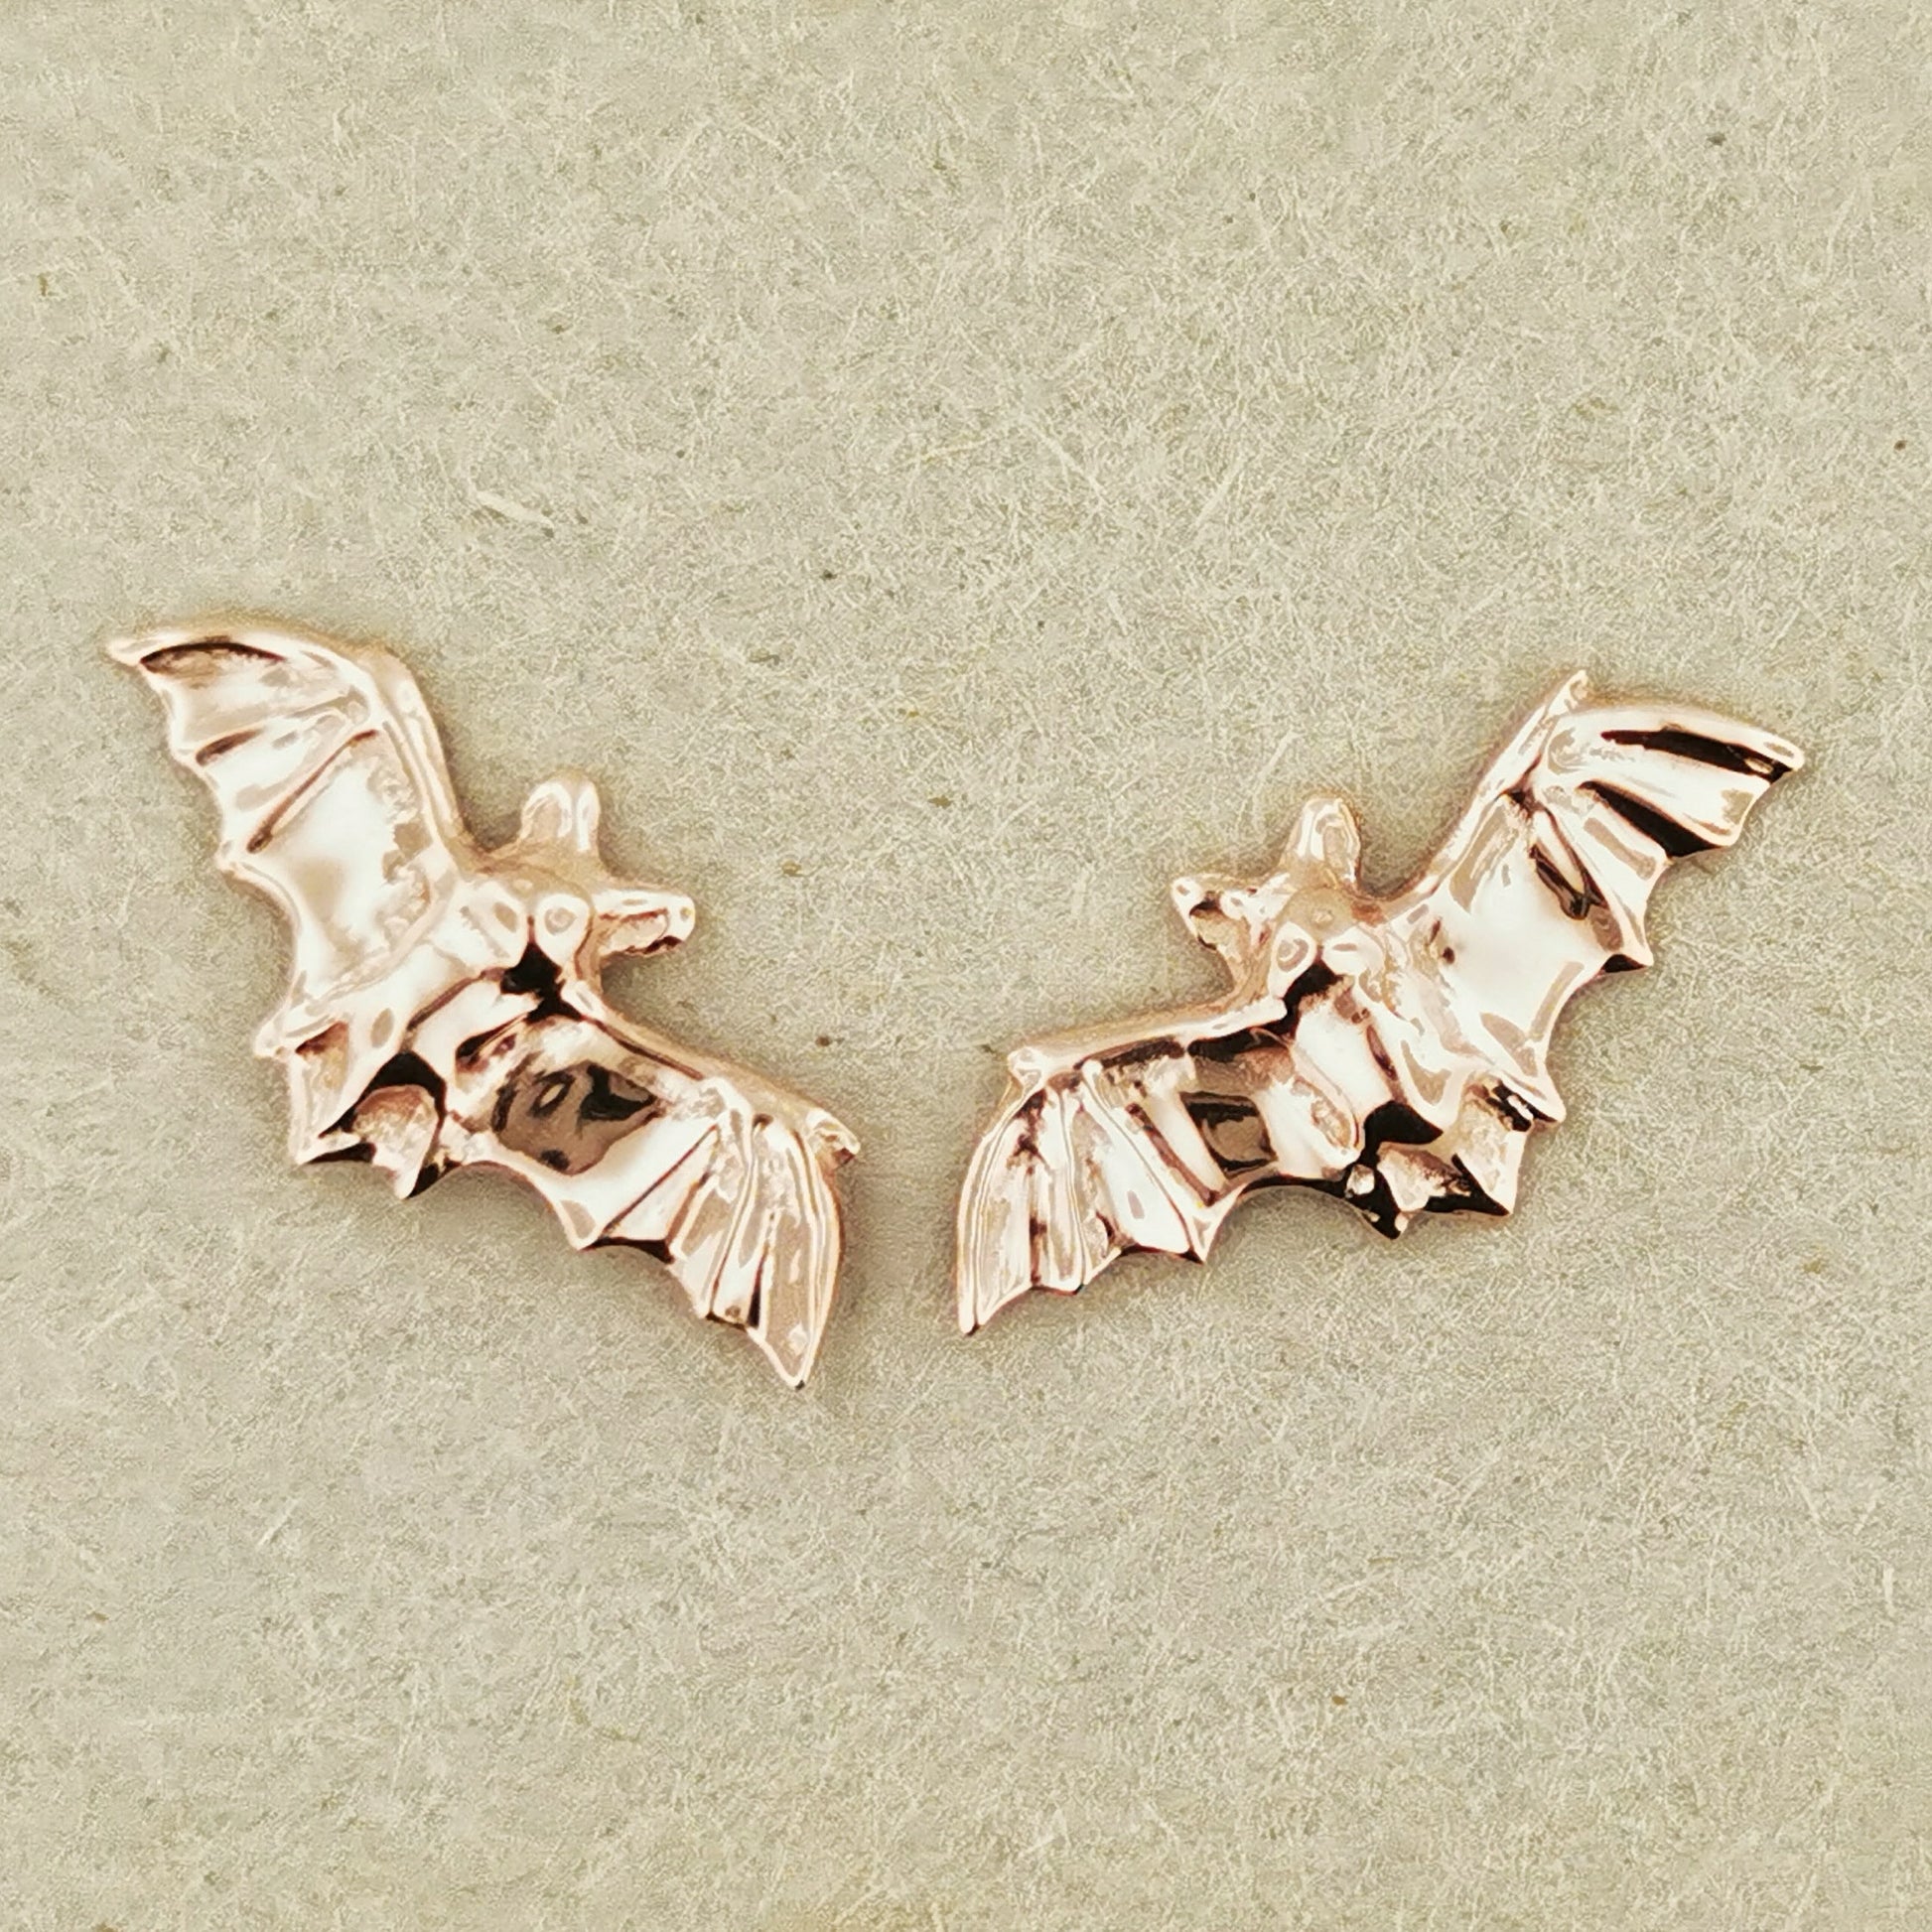 Bat Stud Earrings in Gold Made to Order, Gold Bat Earrings, Gold Bat Jewellery, Gothic Bat Earrings, Gold Animal Stud Earrings, Gold Bat Jewellery, Animal Stud Earrings, Gold Stud Earrings, Bat Lover Gift, Gold Witch Aesthetic, Spooky Gold Earrings